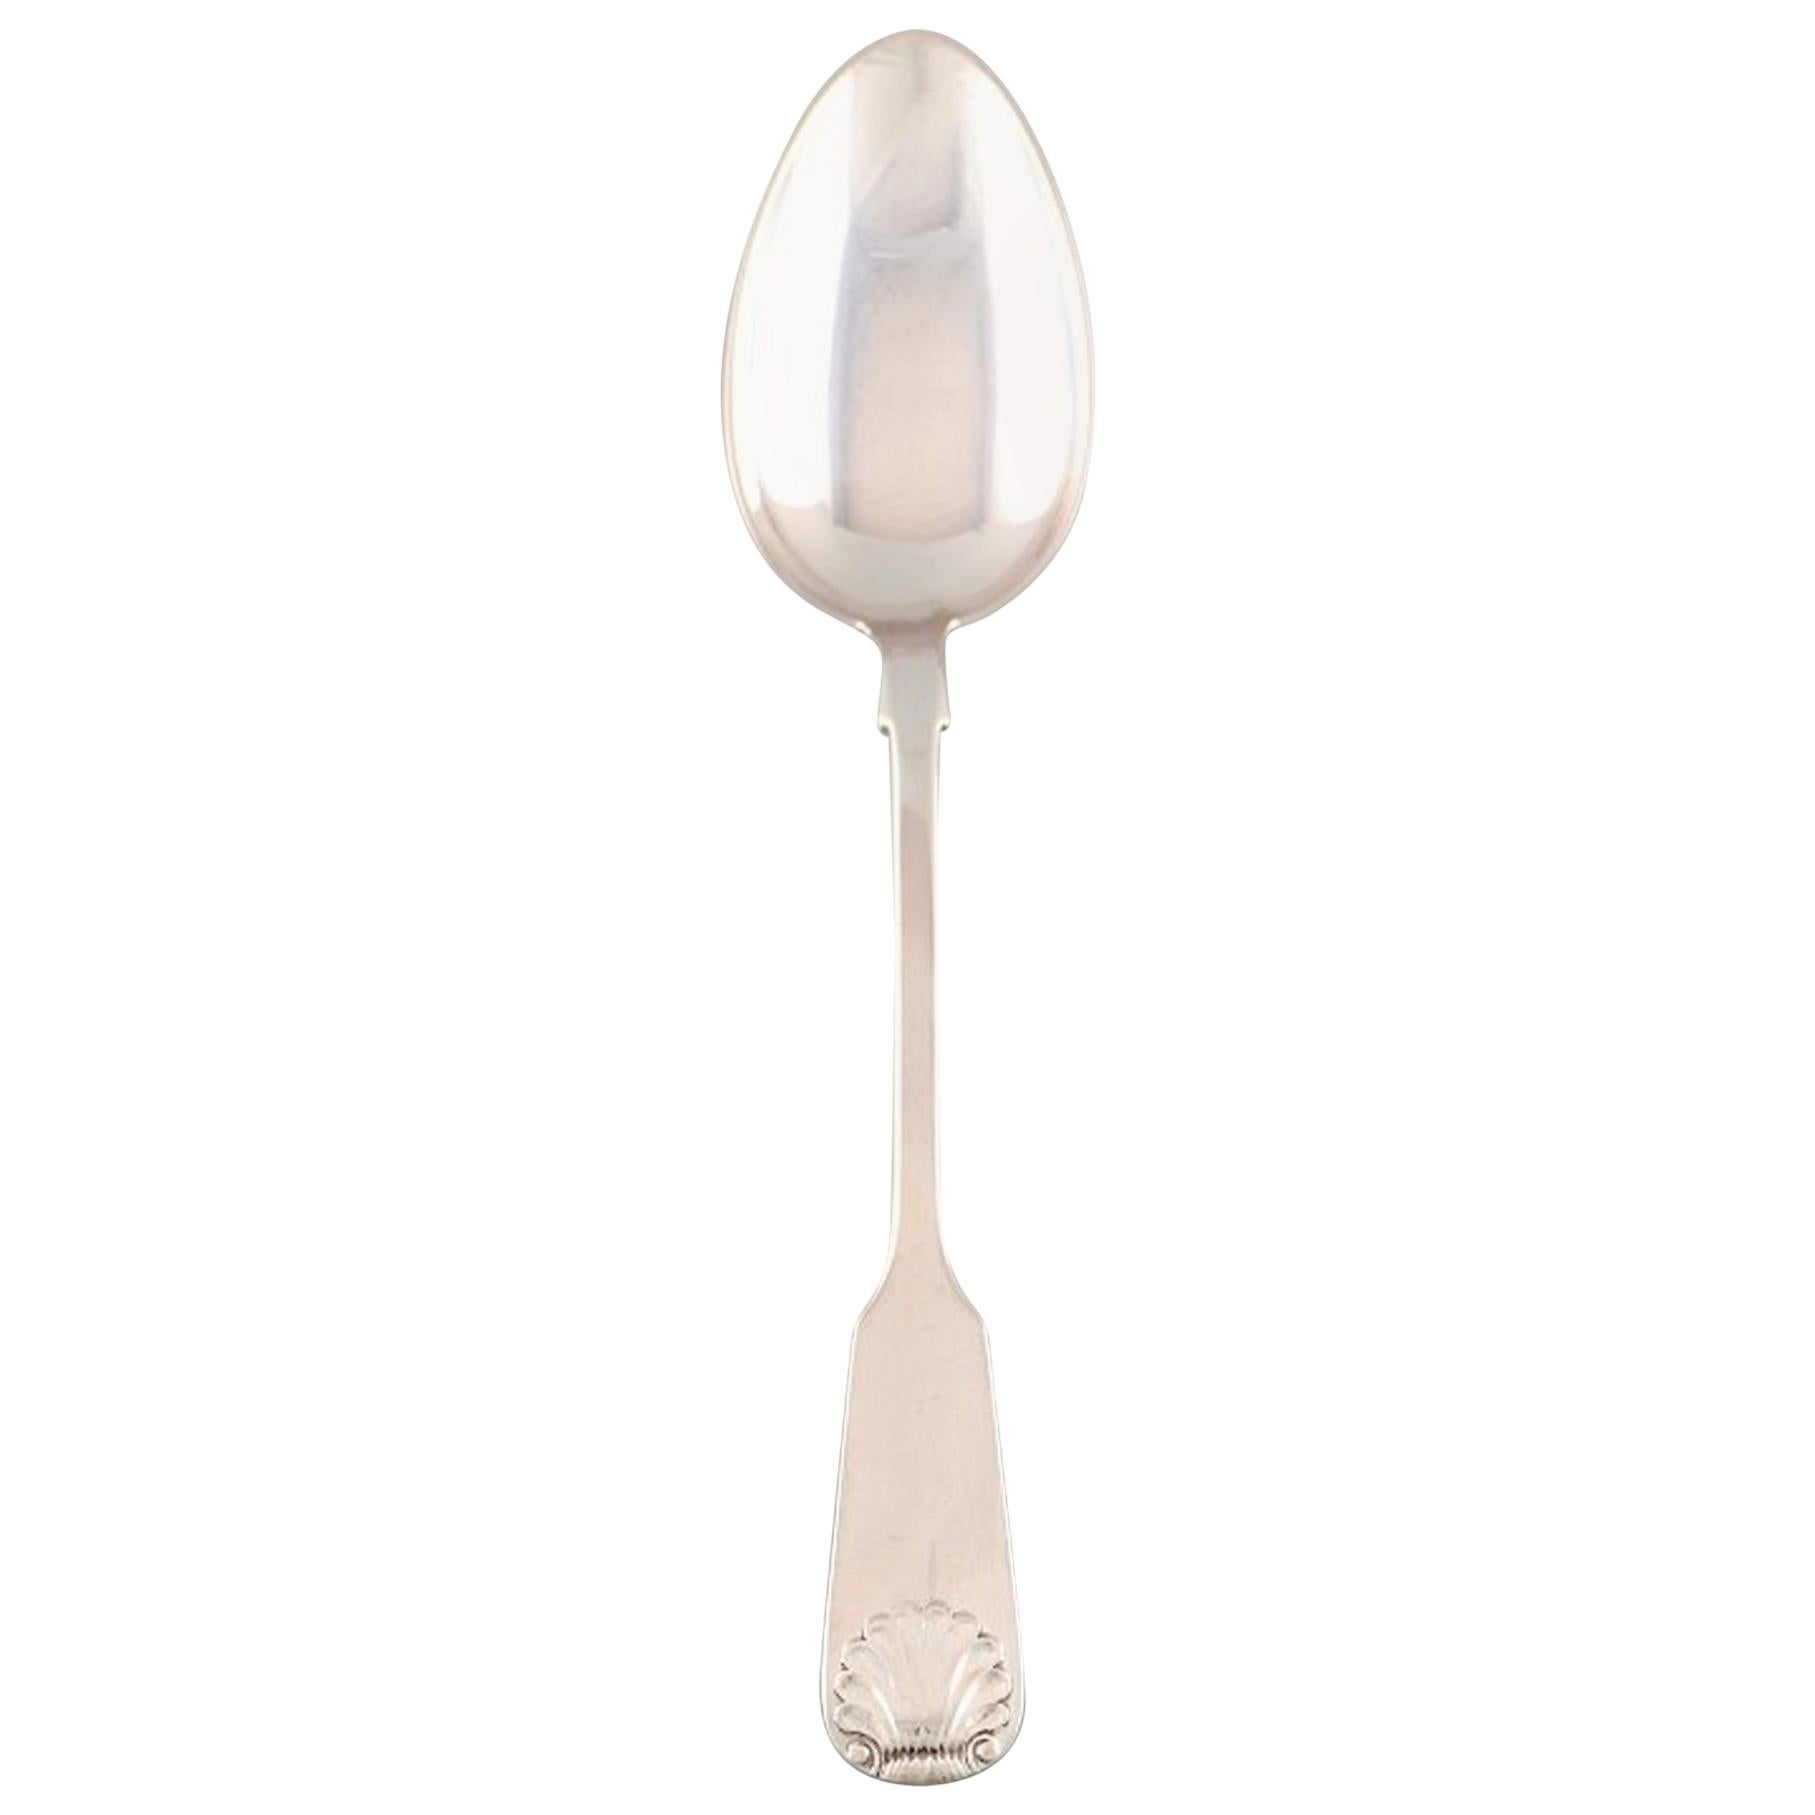 2 Pieces "Mussel" Danish Silver Serving Spoon